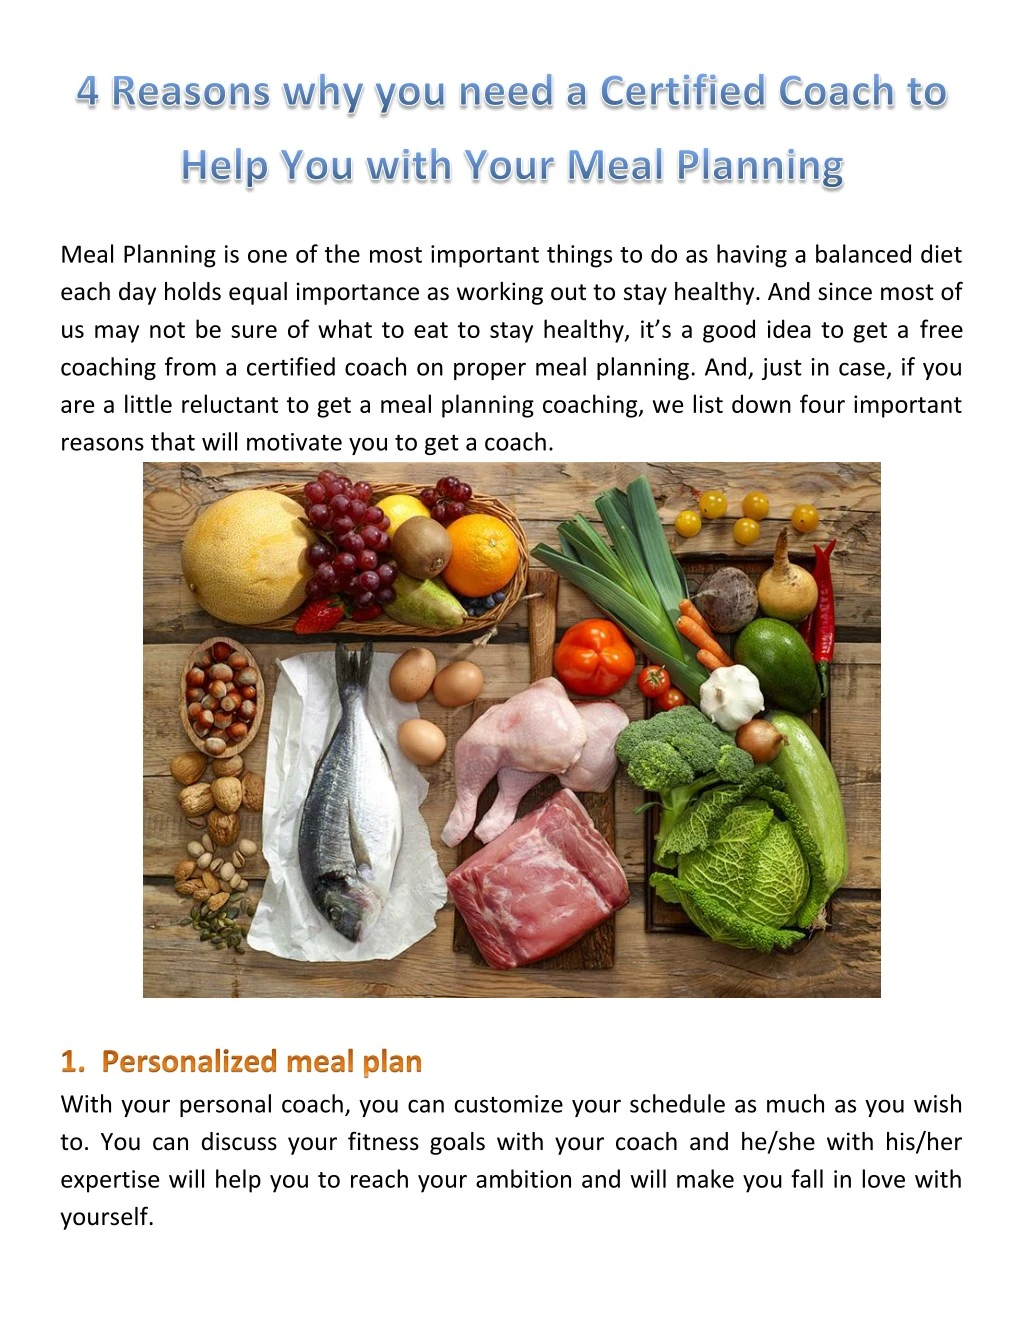 meal planning is one of the most important things